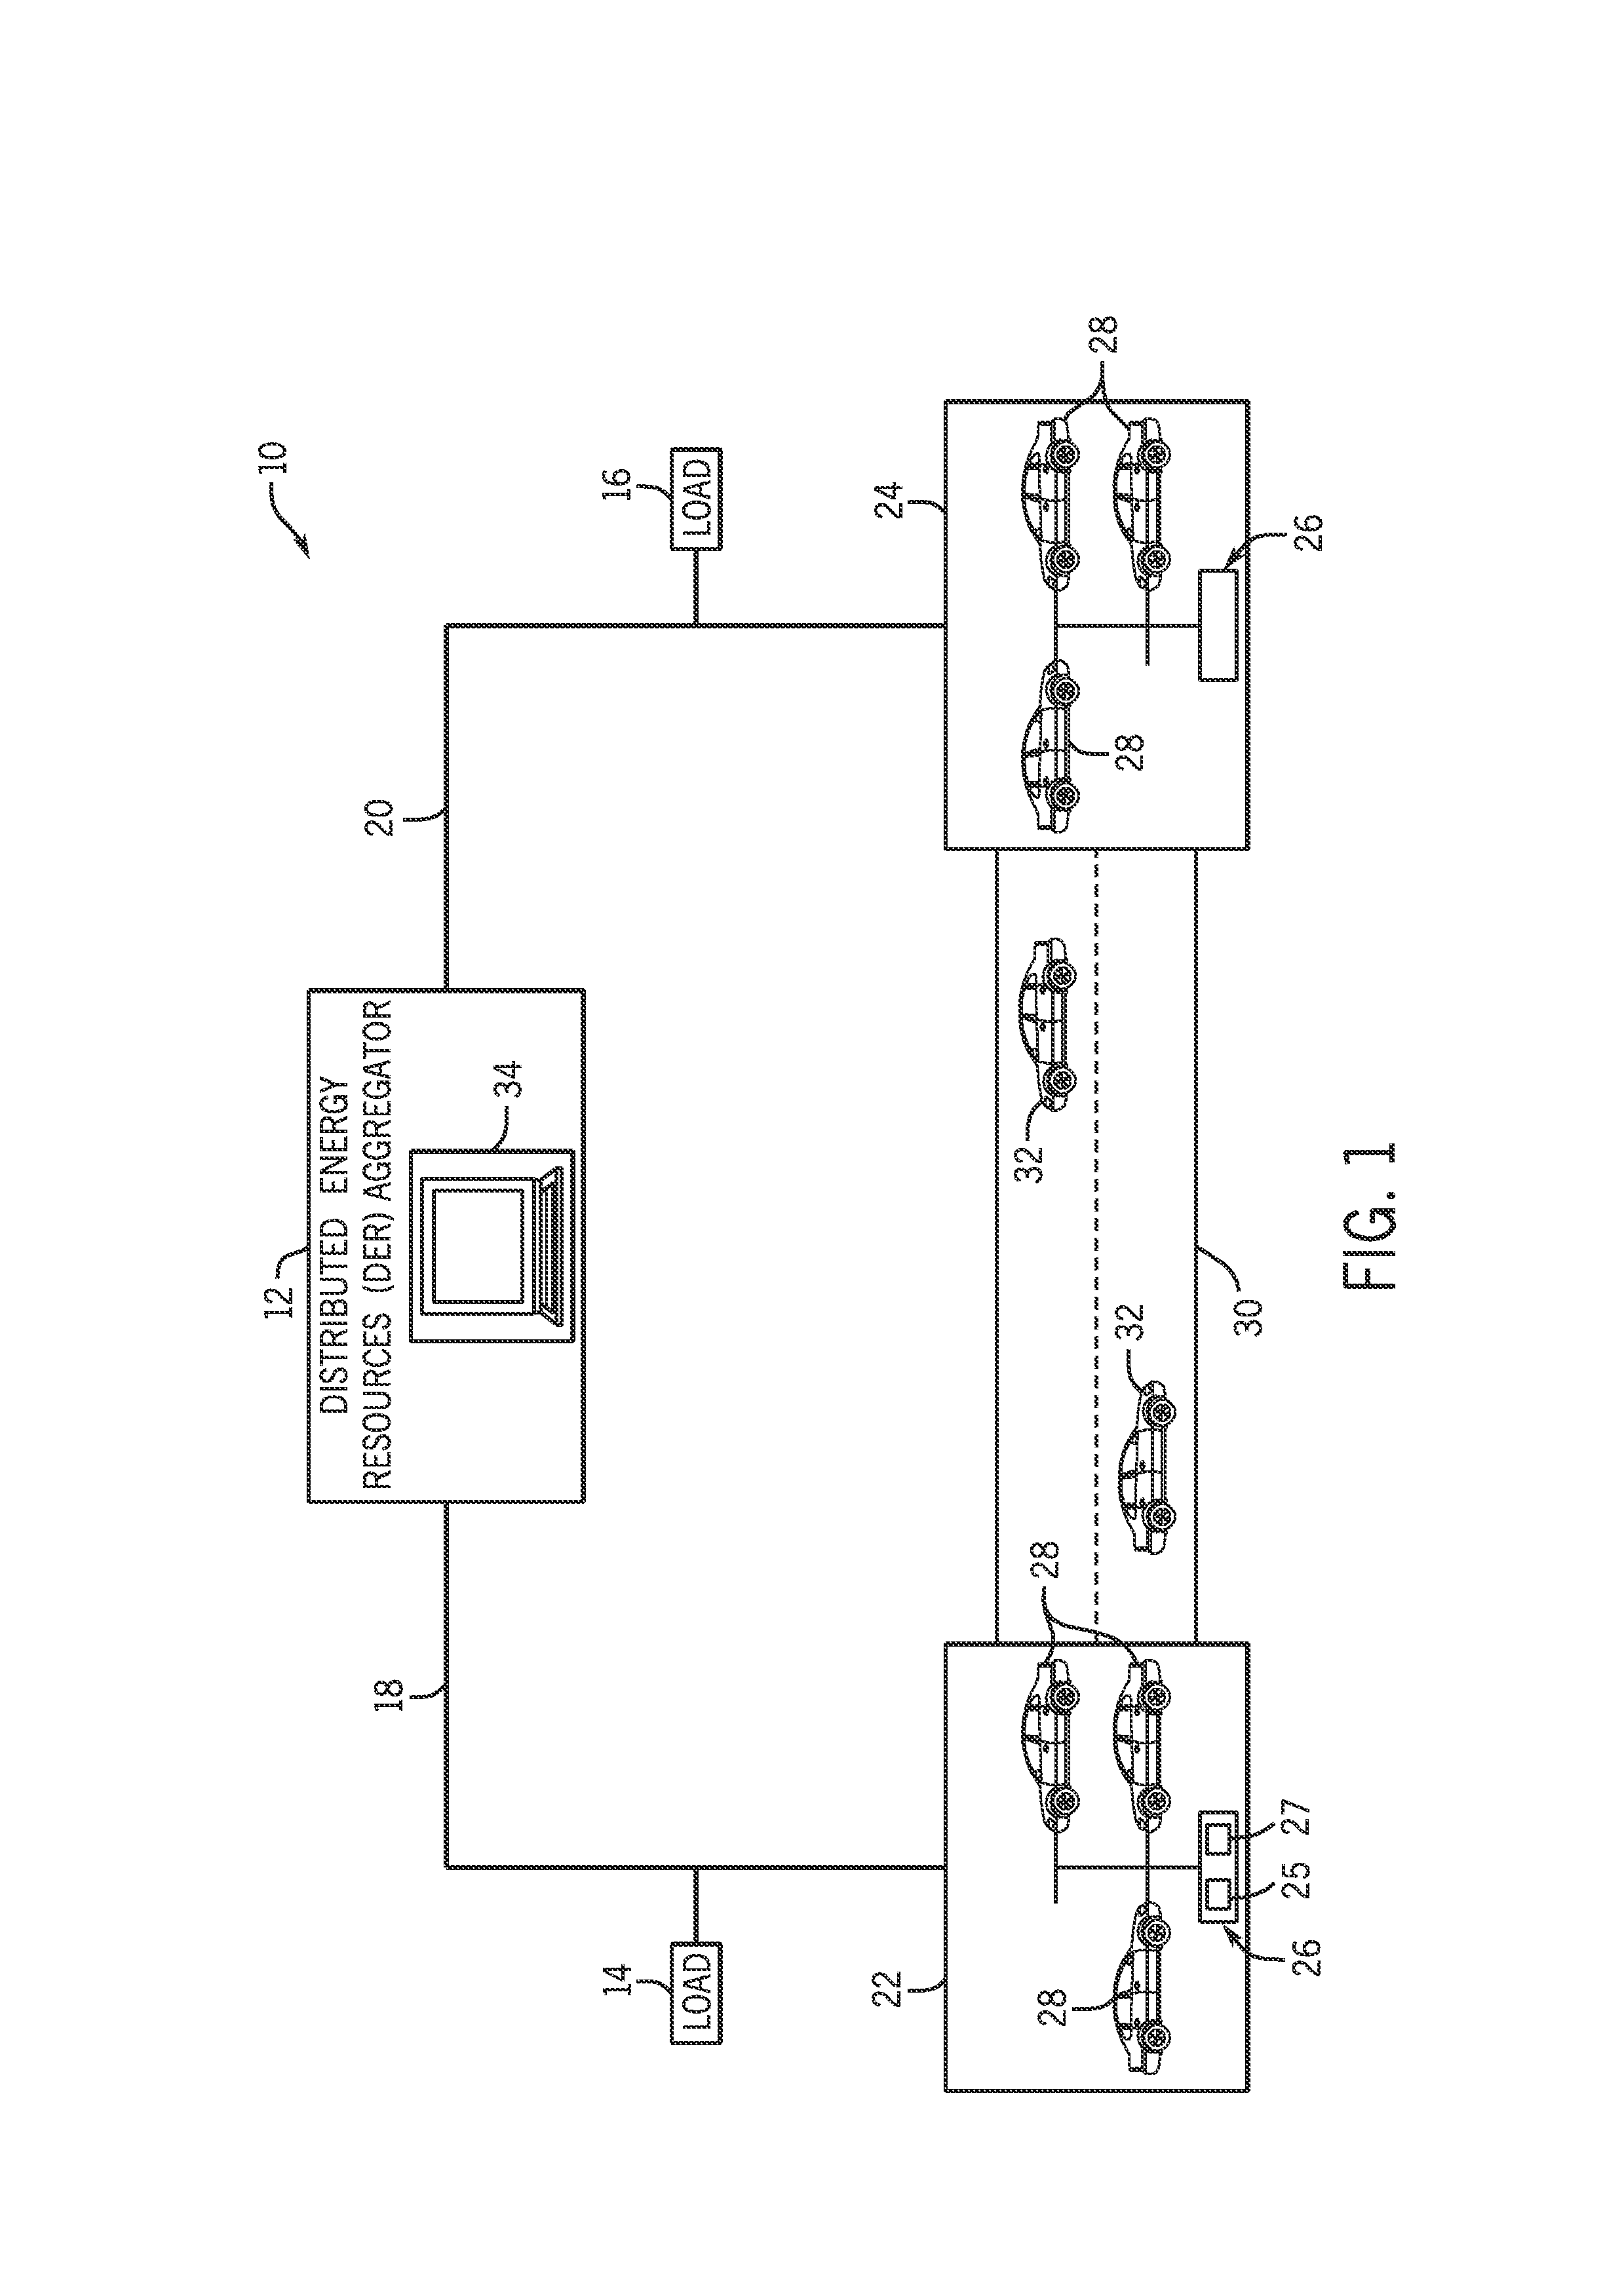 Systems and methods for electric vehicle mobility modeling